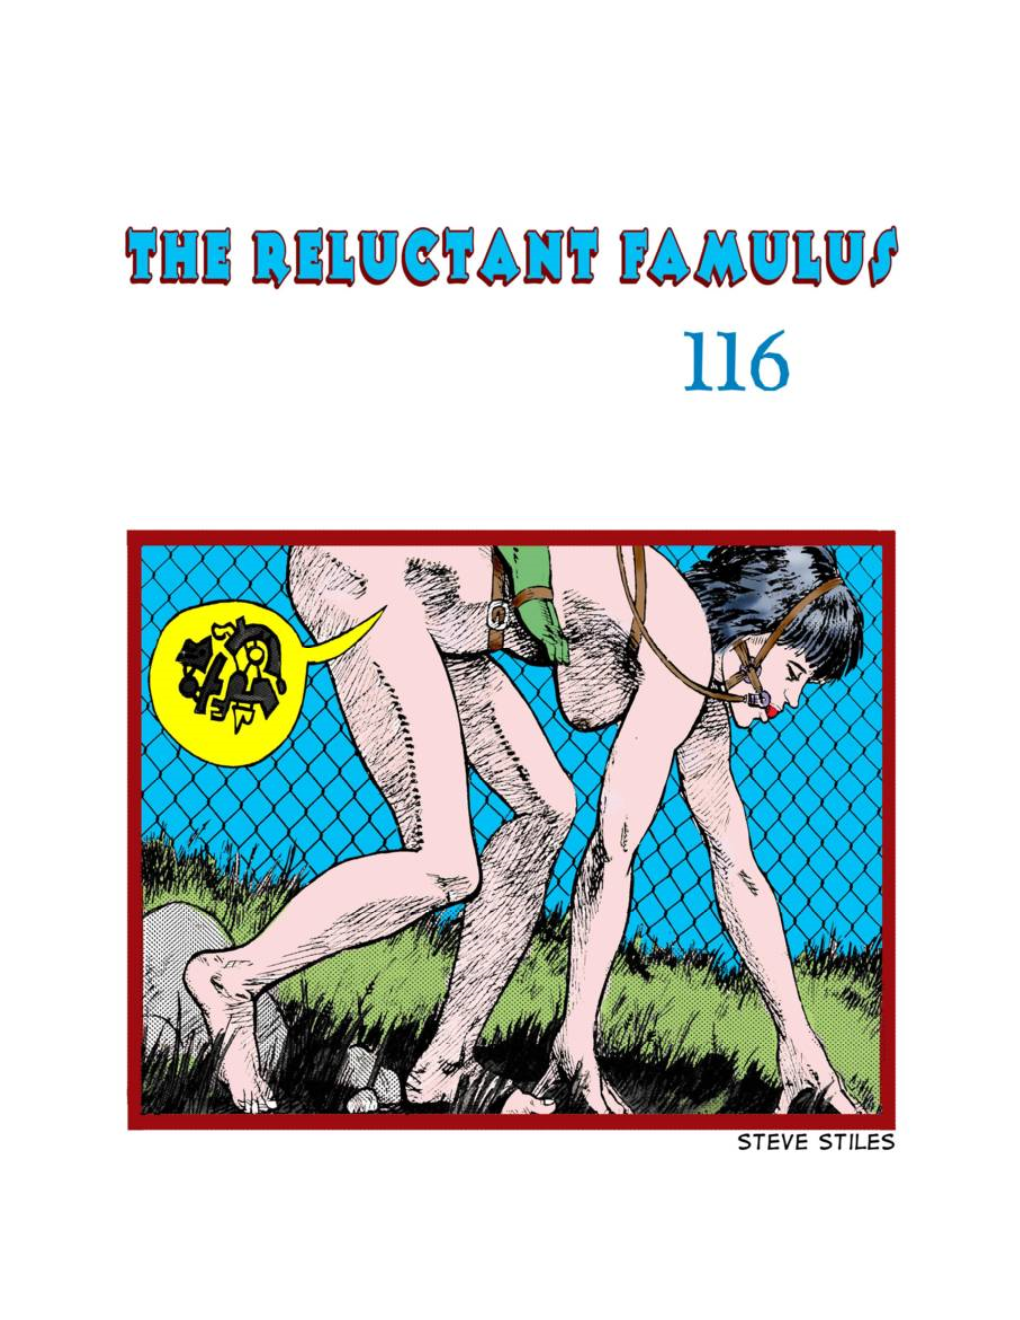 The Reluctant Famulus #116